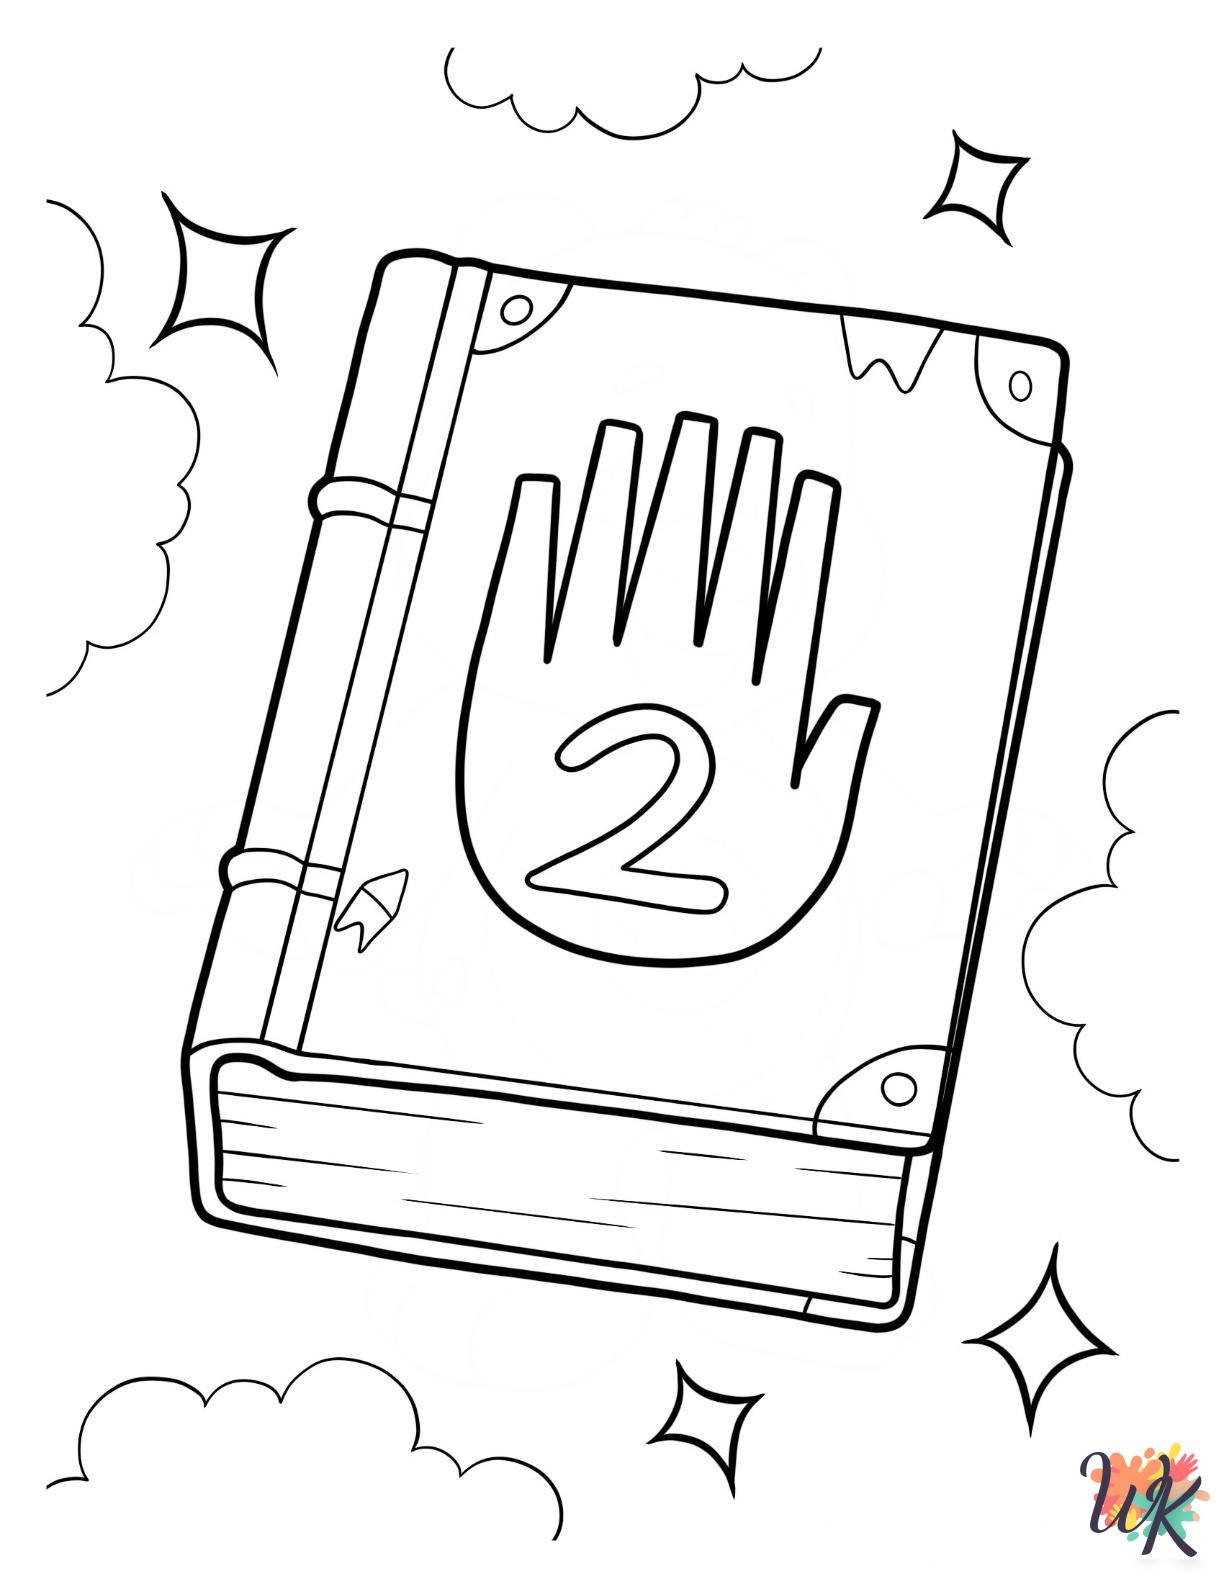 Gravity Falls printable coloring pages